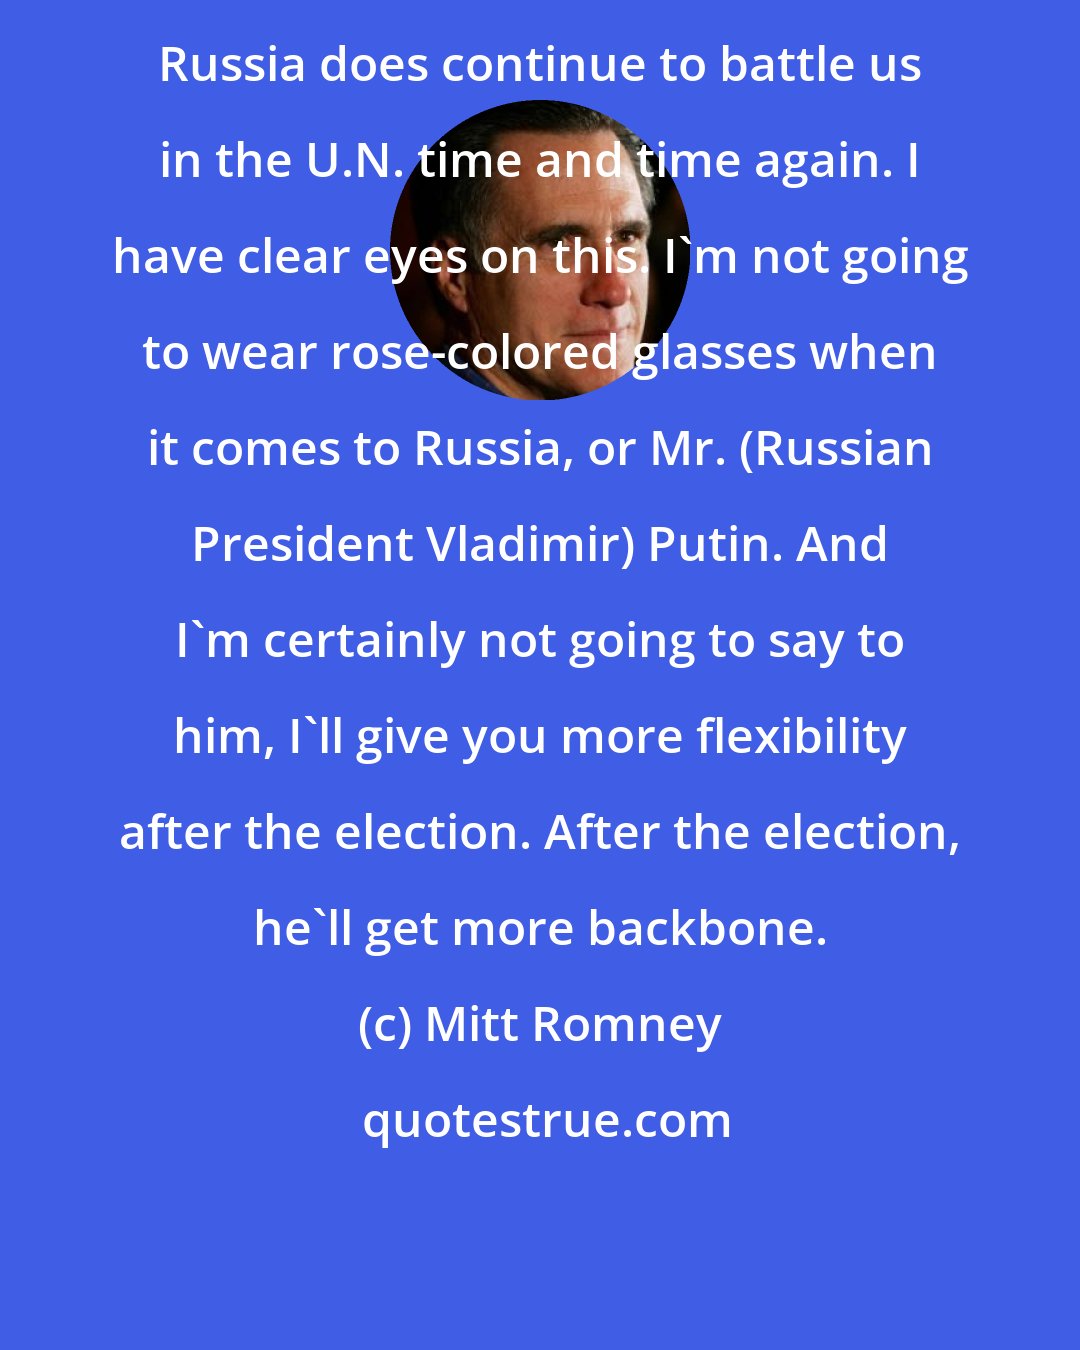 Mitt Romney: Russia does continue to battle us in the U.N. time and time again. I have clear eyes on this. I'm not going to wear rose-colored glasses when it comes to Russia, or Mr. (Russian President Vladimir) Putin. And I'm certainly not going to say to him, I'll give you more flexibility after the election. After the election, he'll get more backbone.